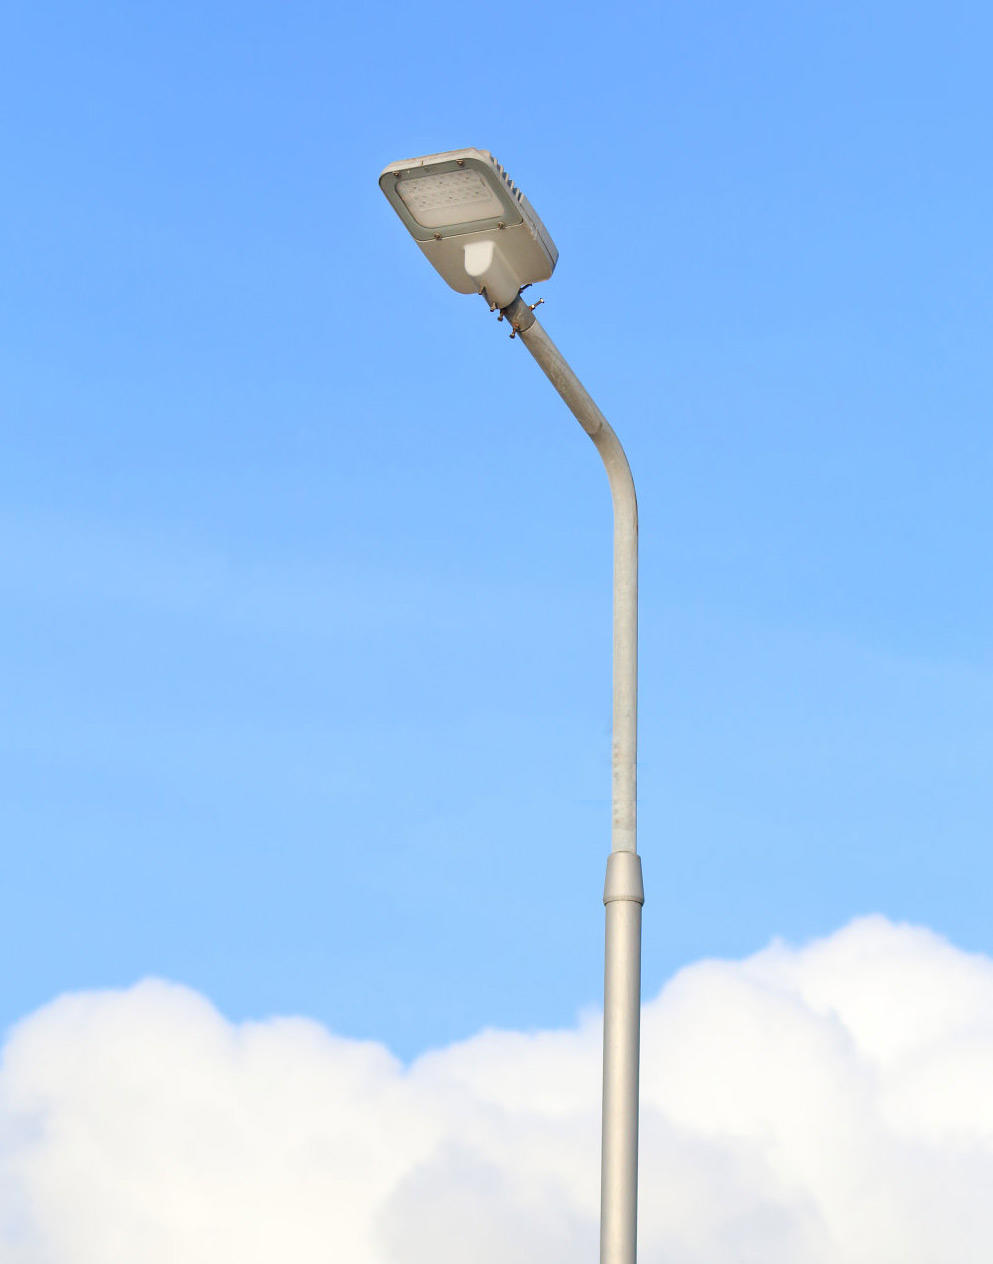 ALLTOP high-quality led street company for facility